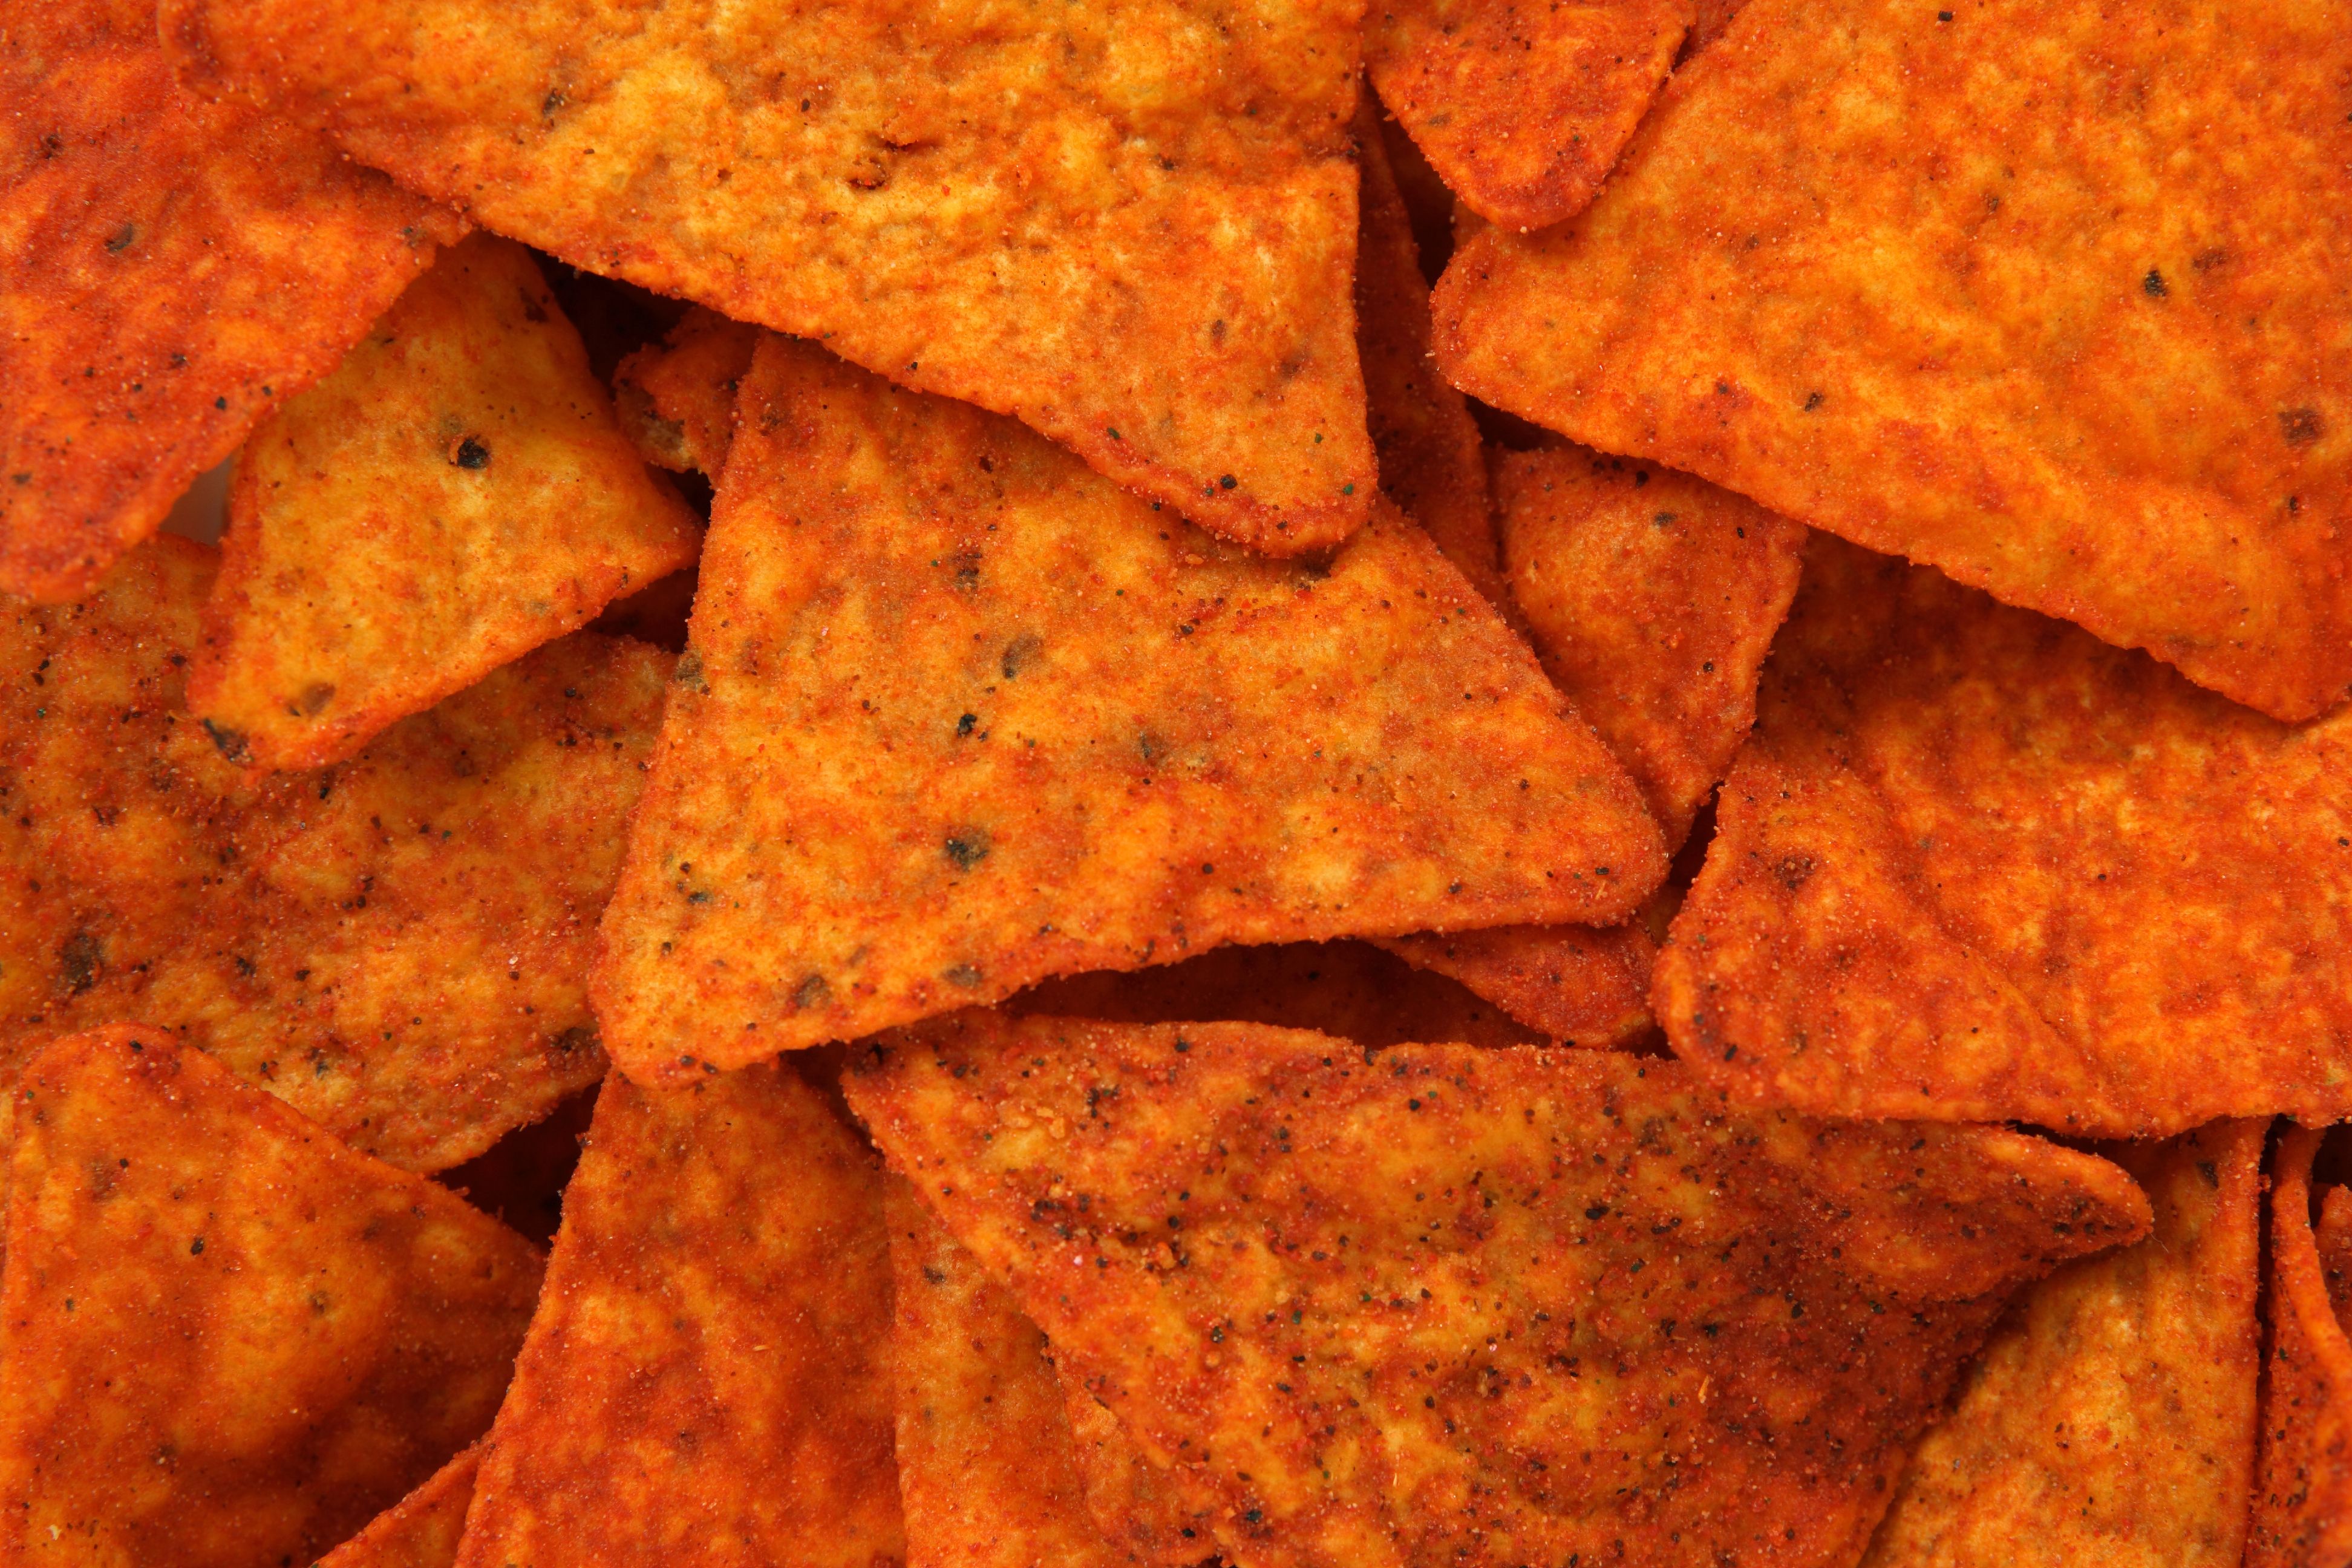 Free download Lady Friendly Doritos Did Not Go Over Well on the Internet Time [3888x2592] for your Desktop, Mobile & Tablet. Explore Doritos Background. Doritos Wallpaper. Do not mention downloads or free downloads - Doritos